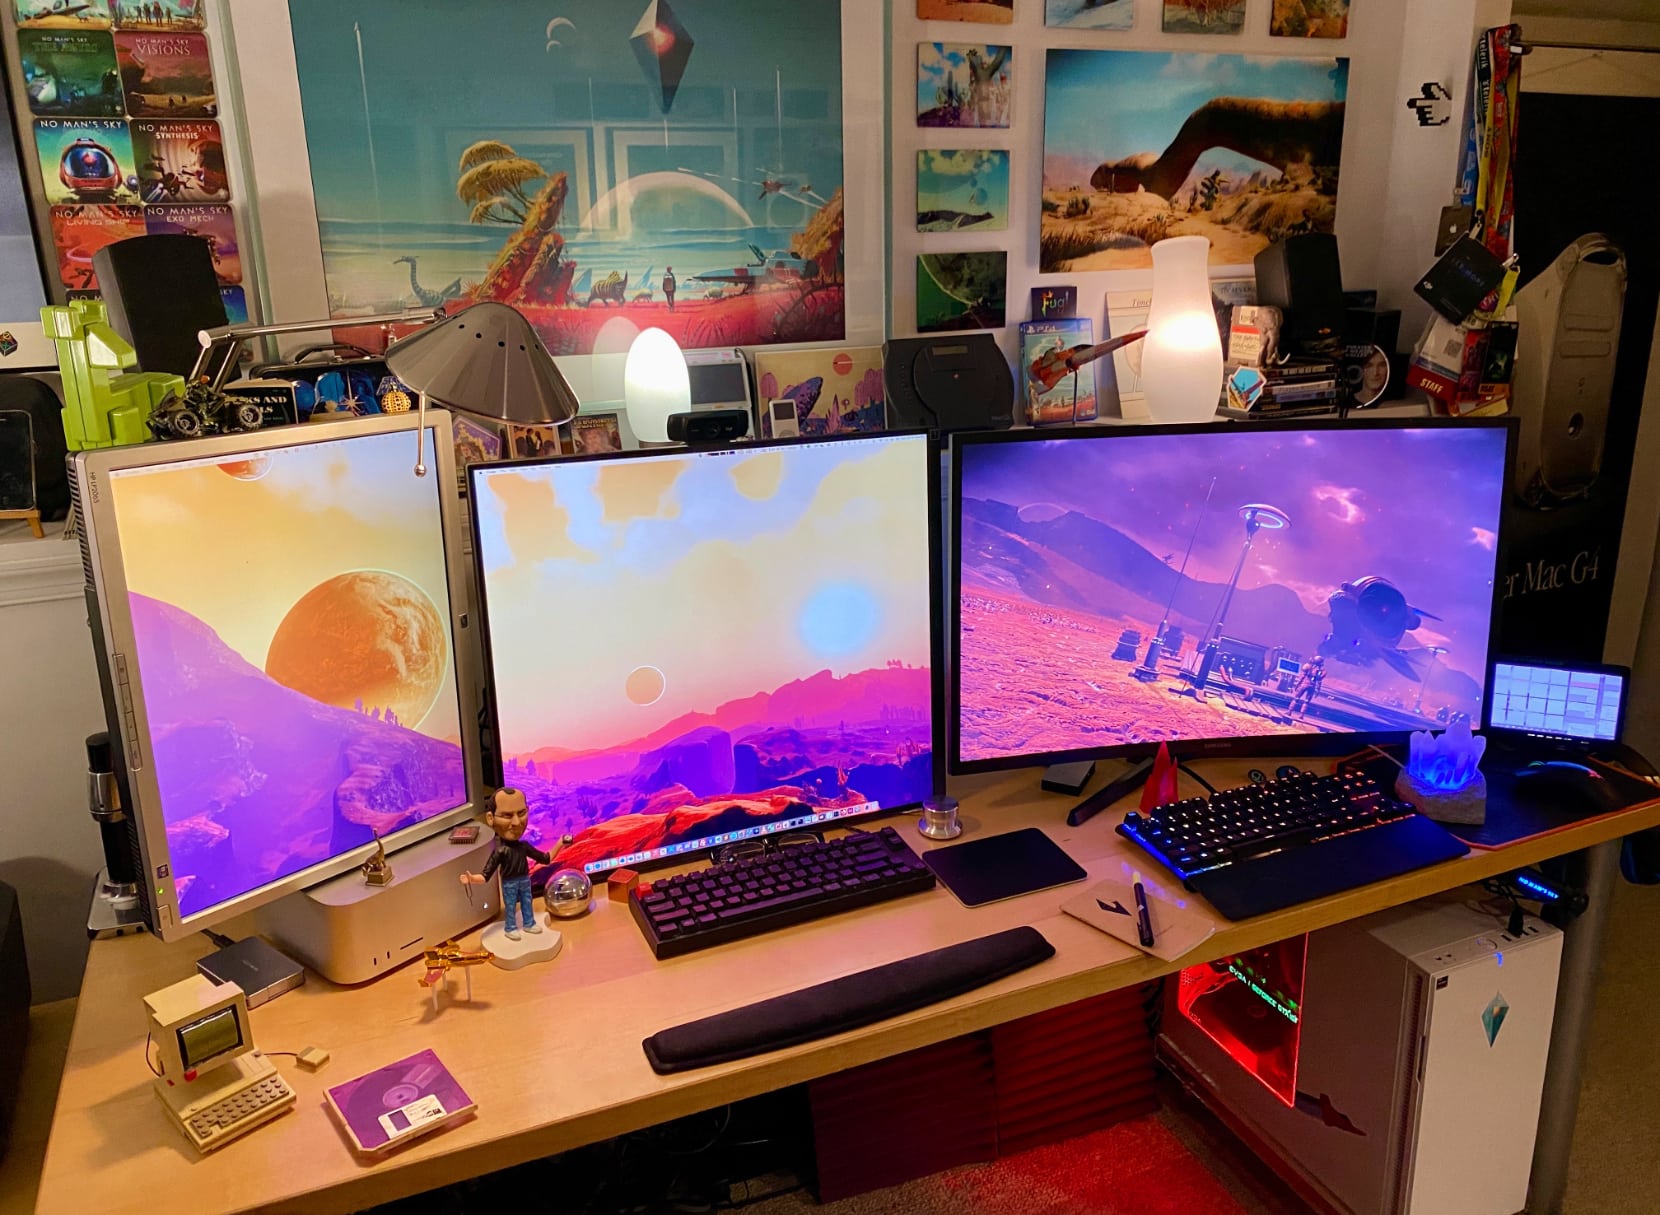 Ryzen gaming PC sharing a desk with Mac Pro system